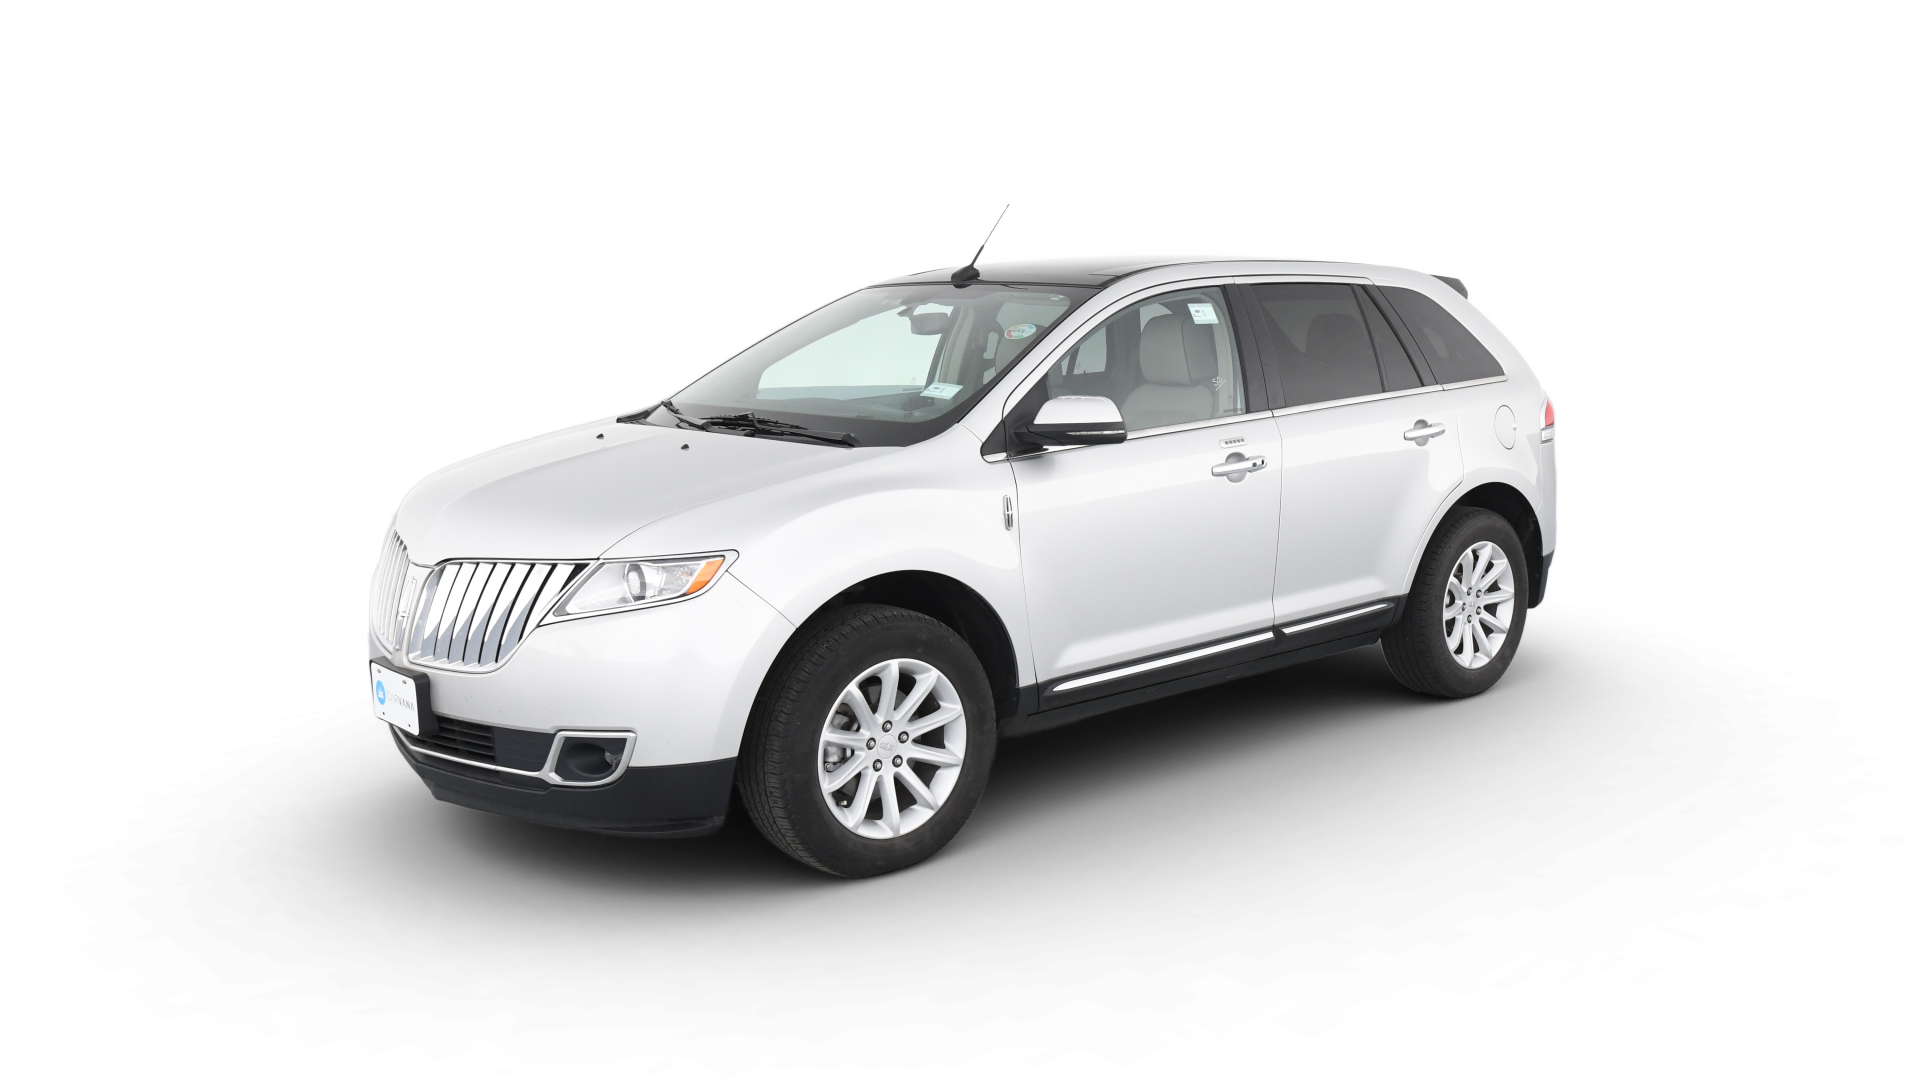 Used 2013 Lincoln MKX For Sale Online | Carvana